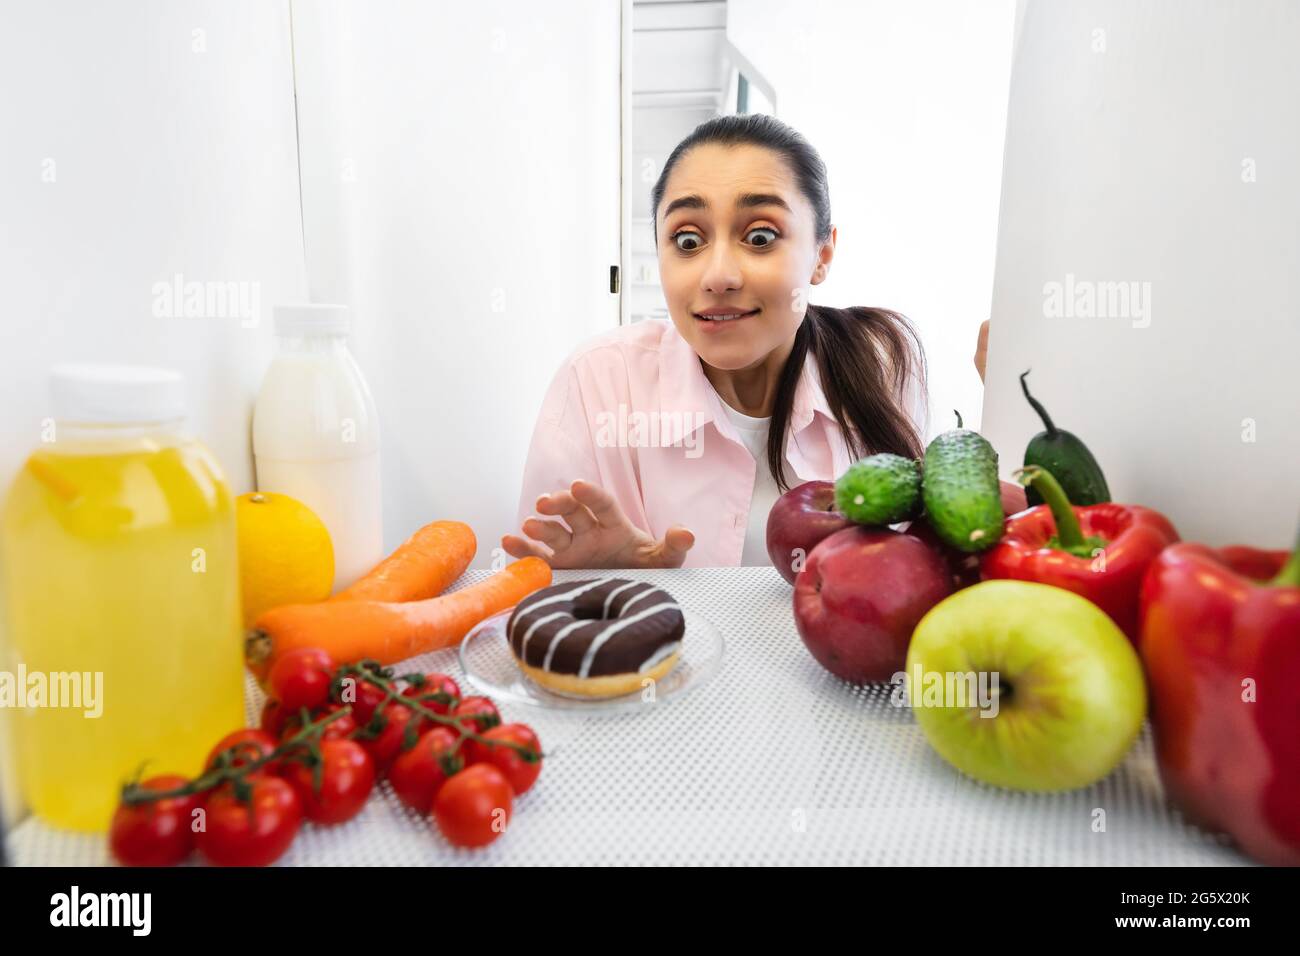 Excited funny woman looking at yummy donut view from fridge Stock Photo